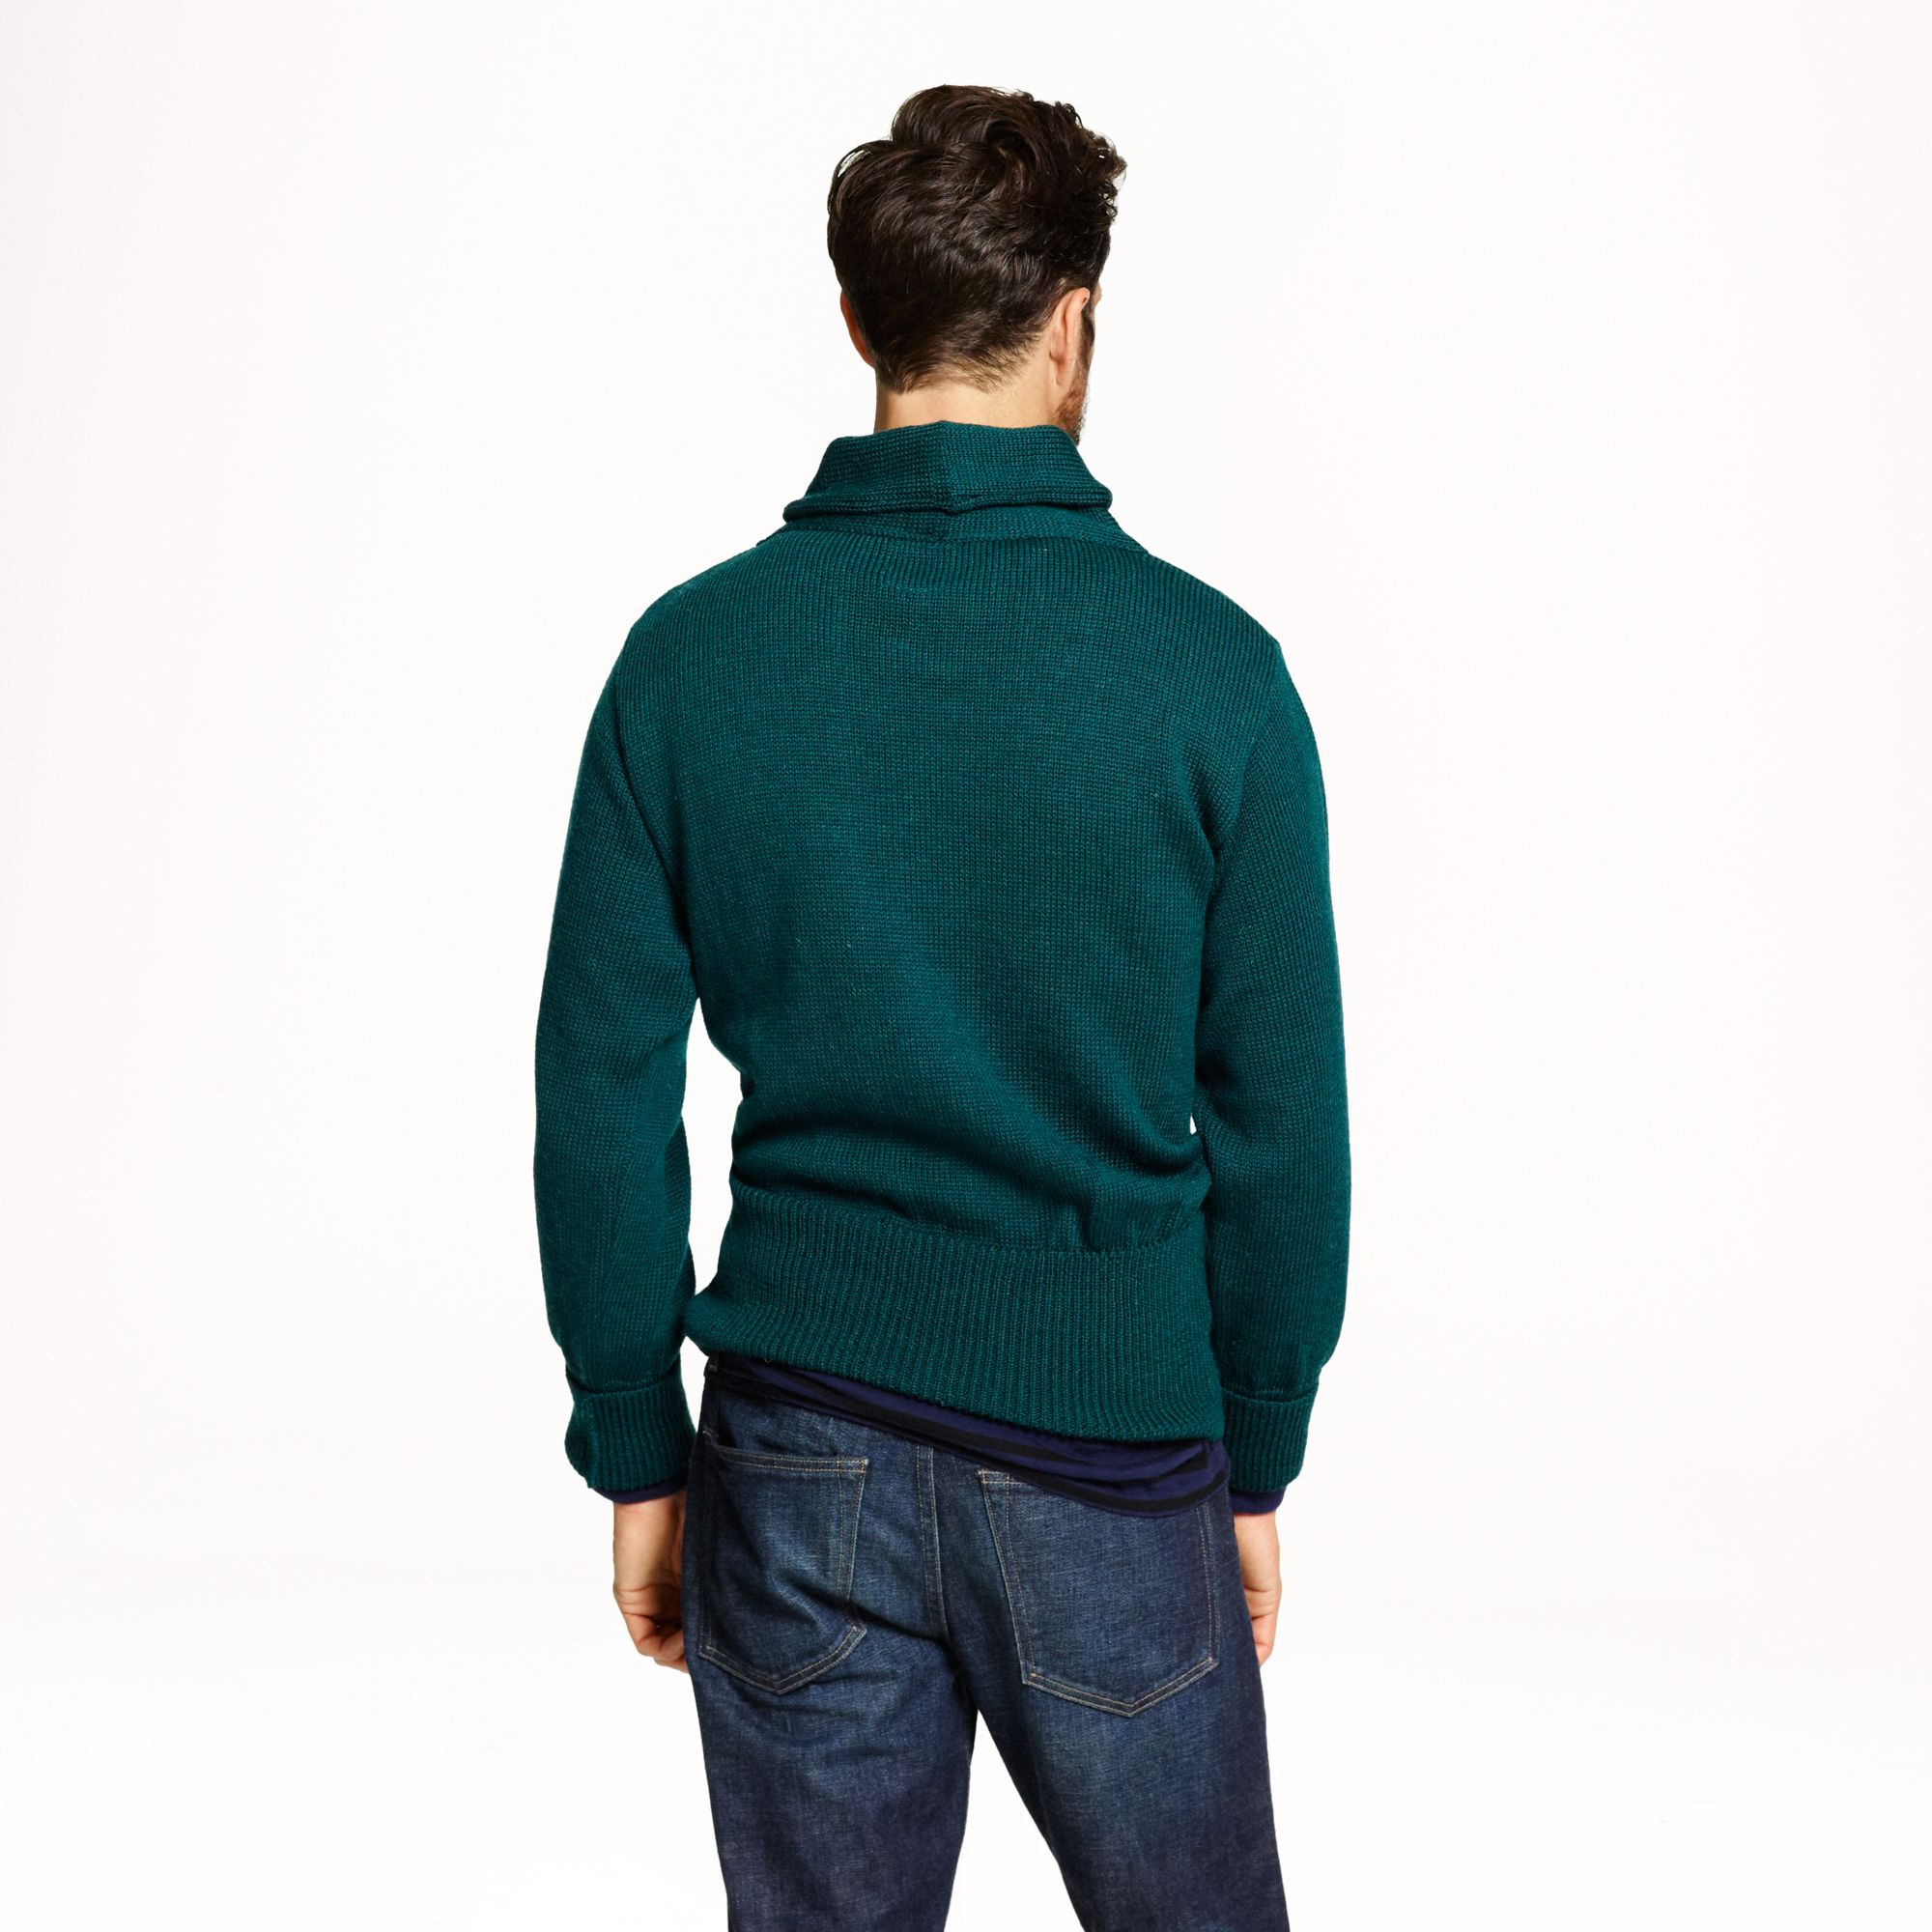 J.Crew North Sea Clothing Expedition Sweater in Green for Men - Lyst